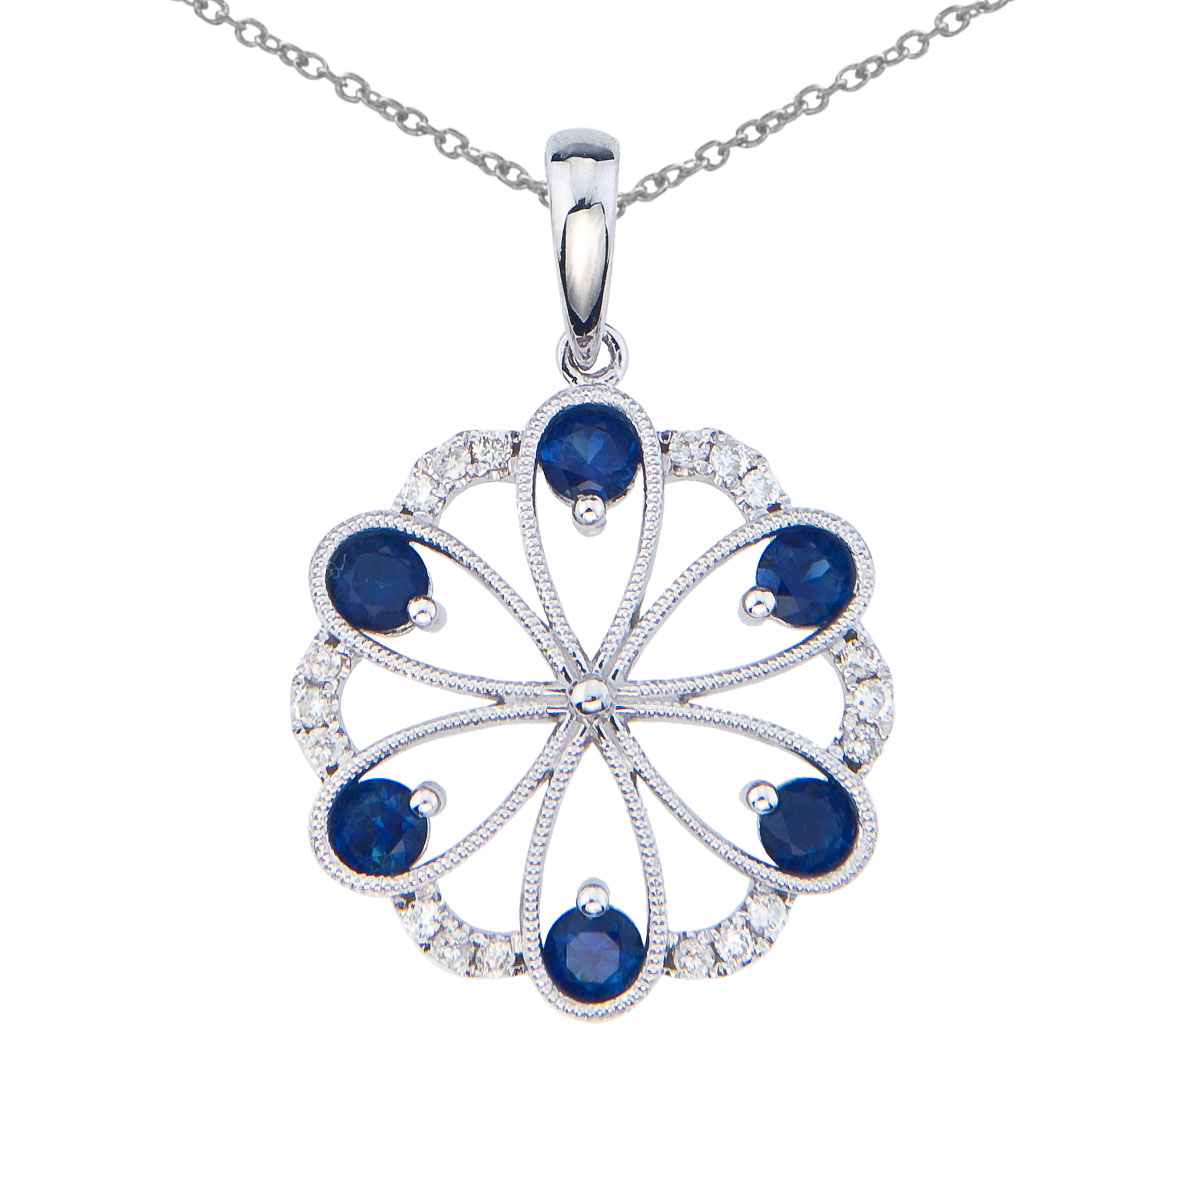 JCX2562: Beautiful floral pendant set in 14k white gold with 6 dazzling sapphires and .14 total carats of bright diamonds.